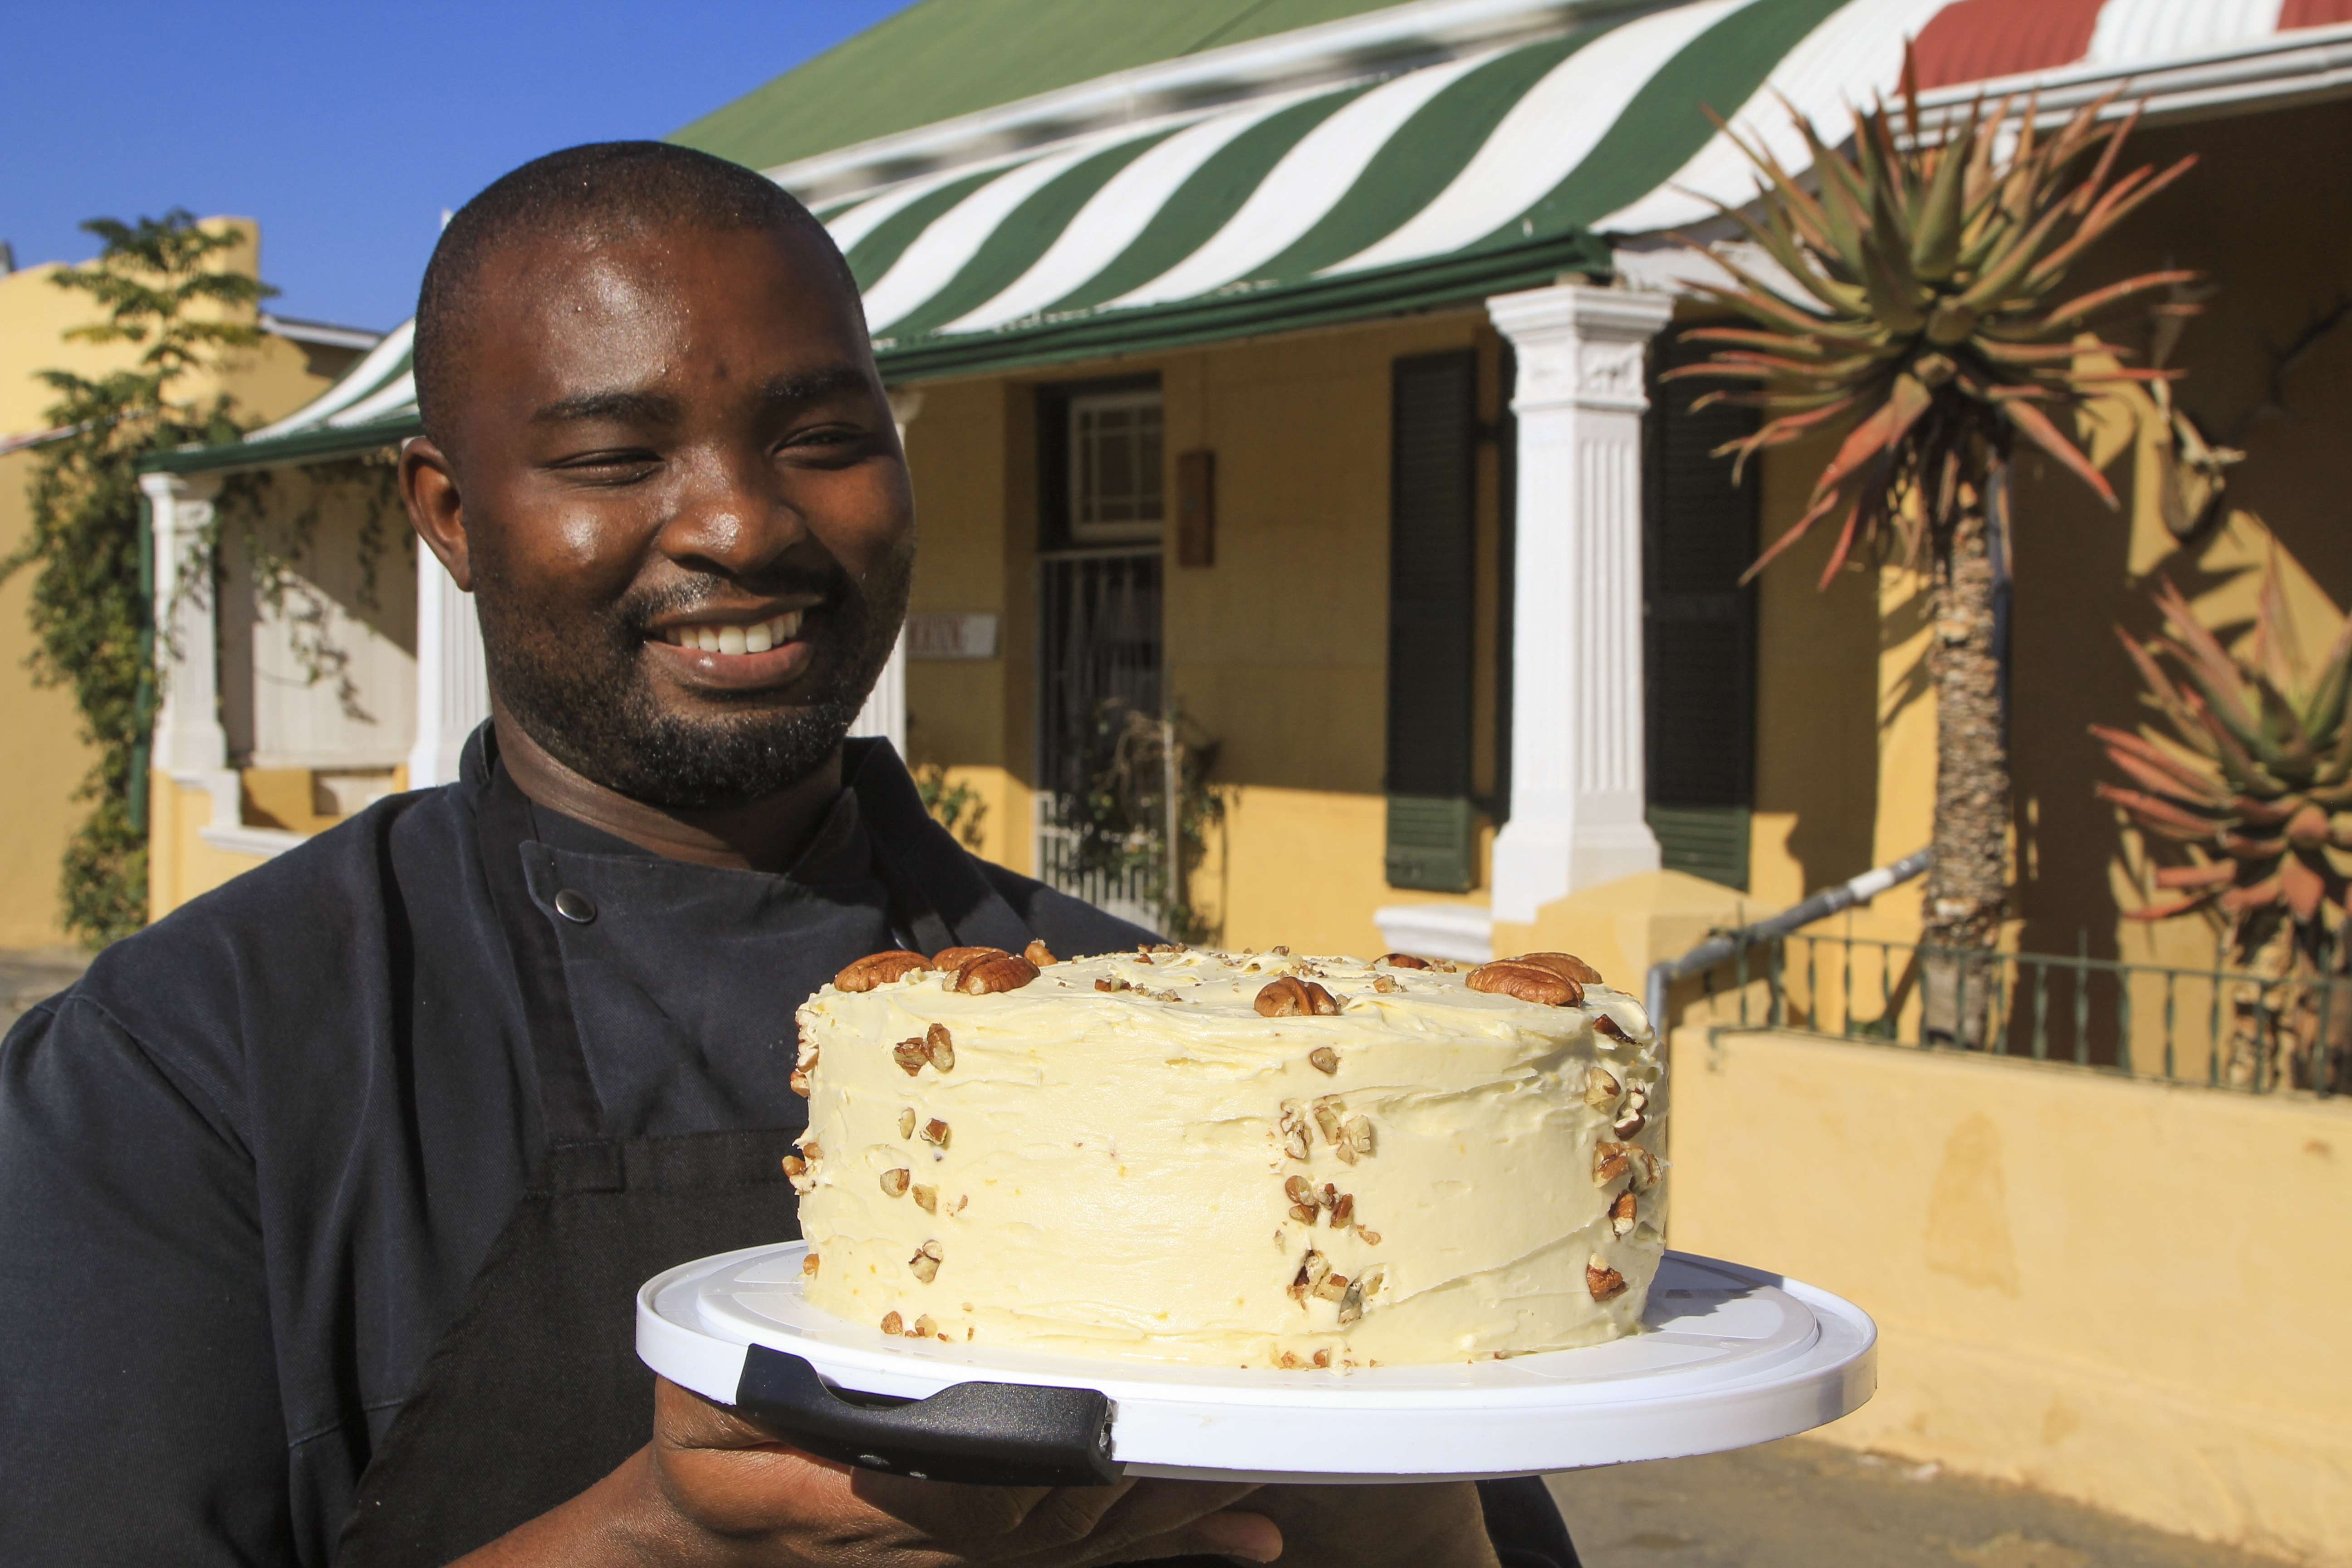 Maswazandile ‘Maswazi’ Mabusela, breakfast chef at the Tuishuise and Victoria Manor in Cradock, became locally famous for the carrot cakes he used to make in his spare time. Image: Chris Marais